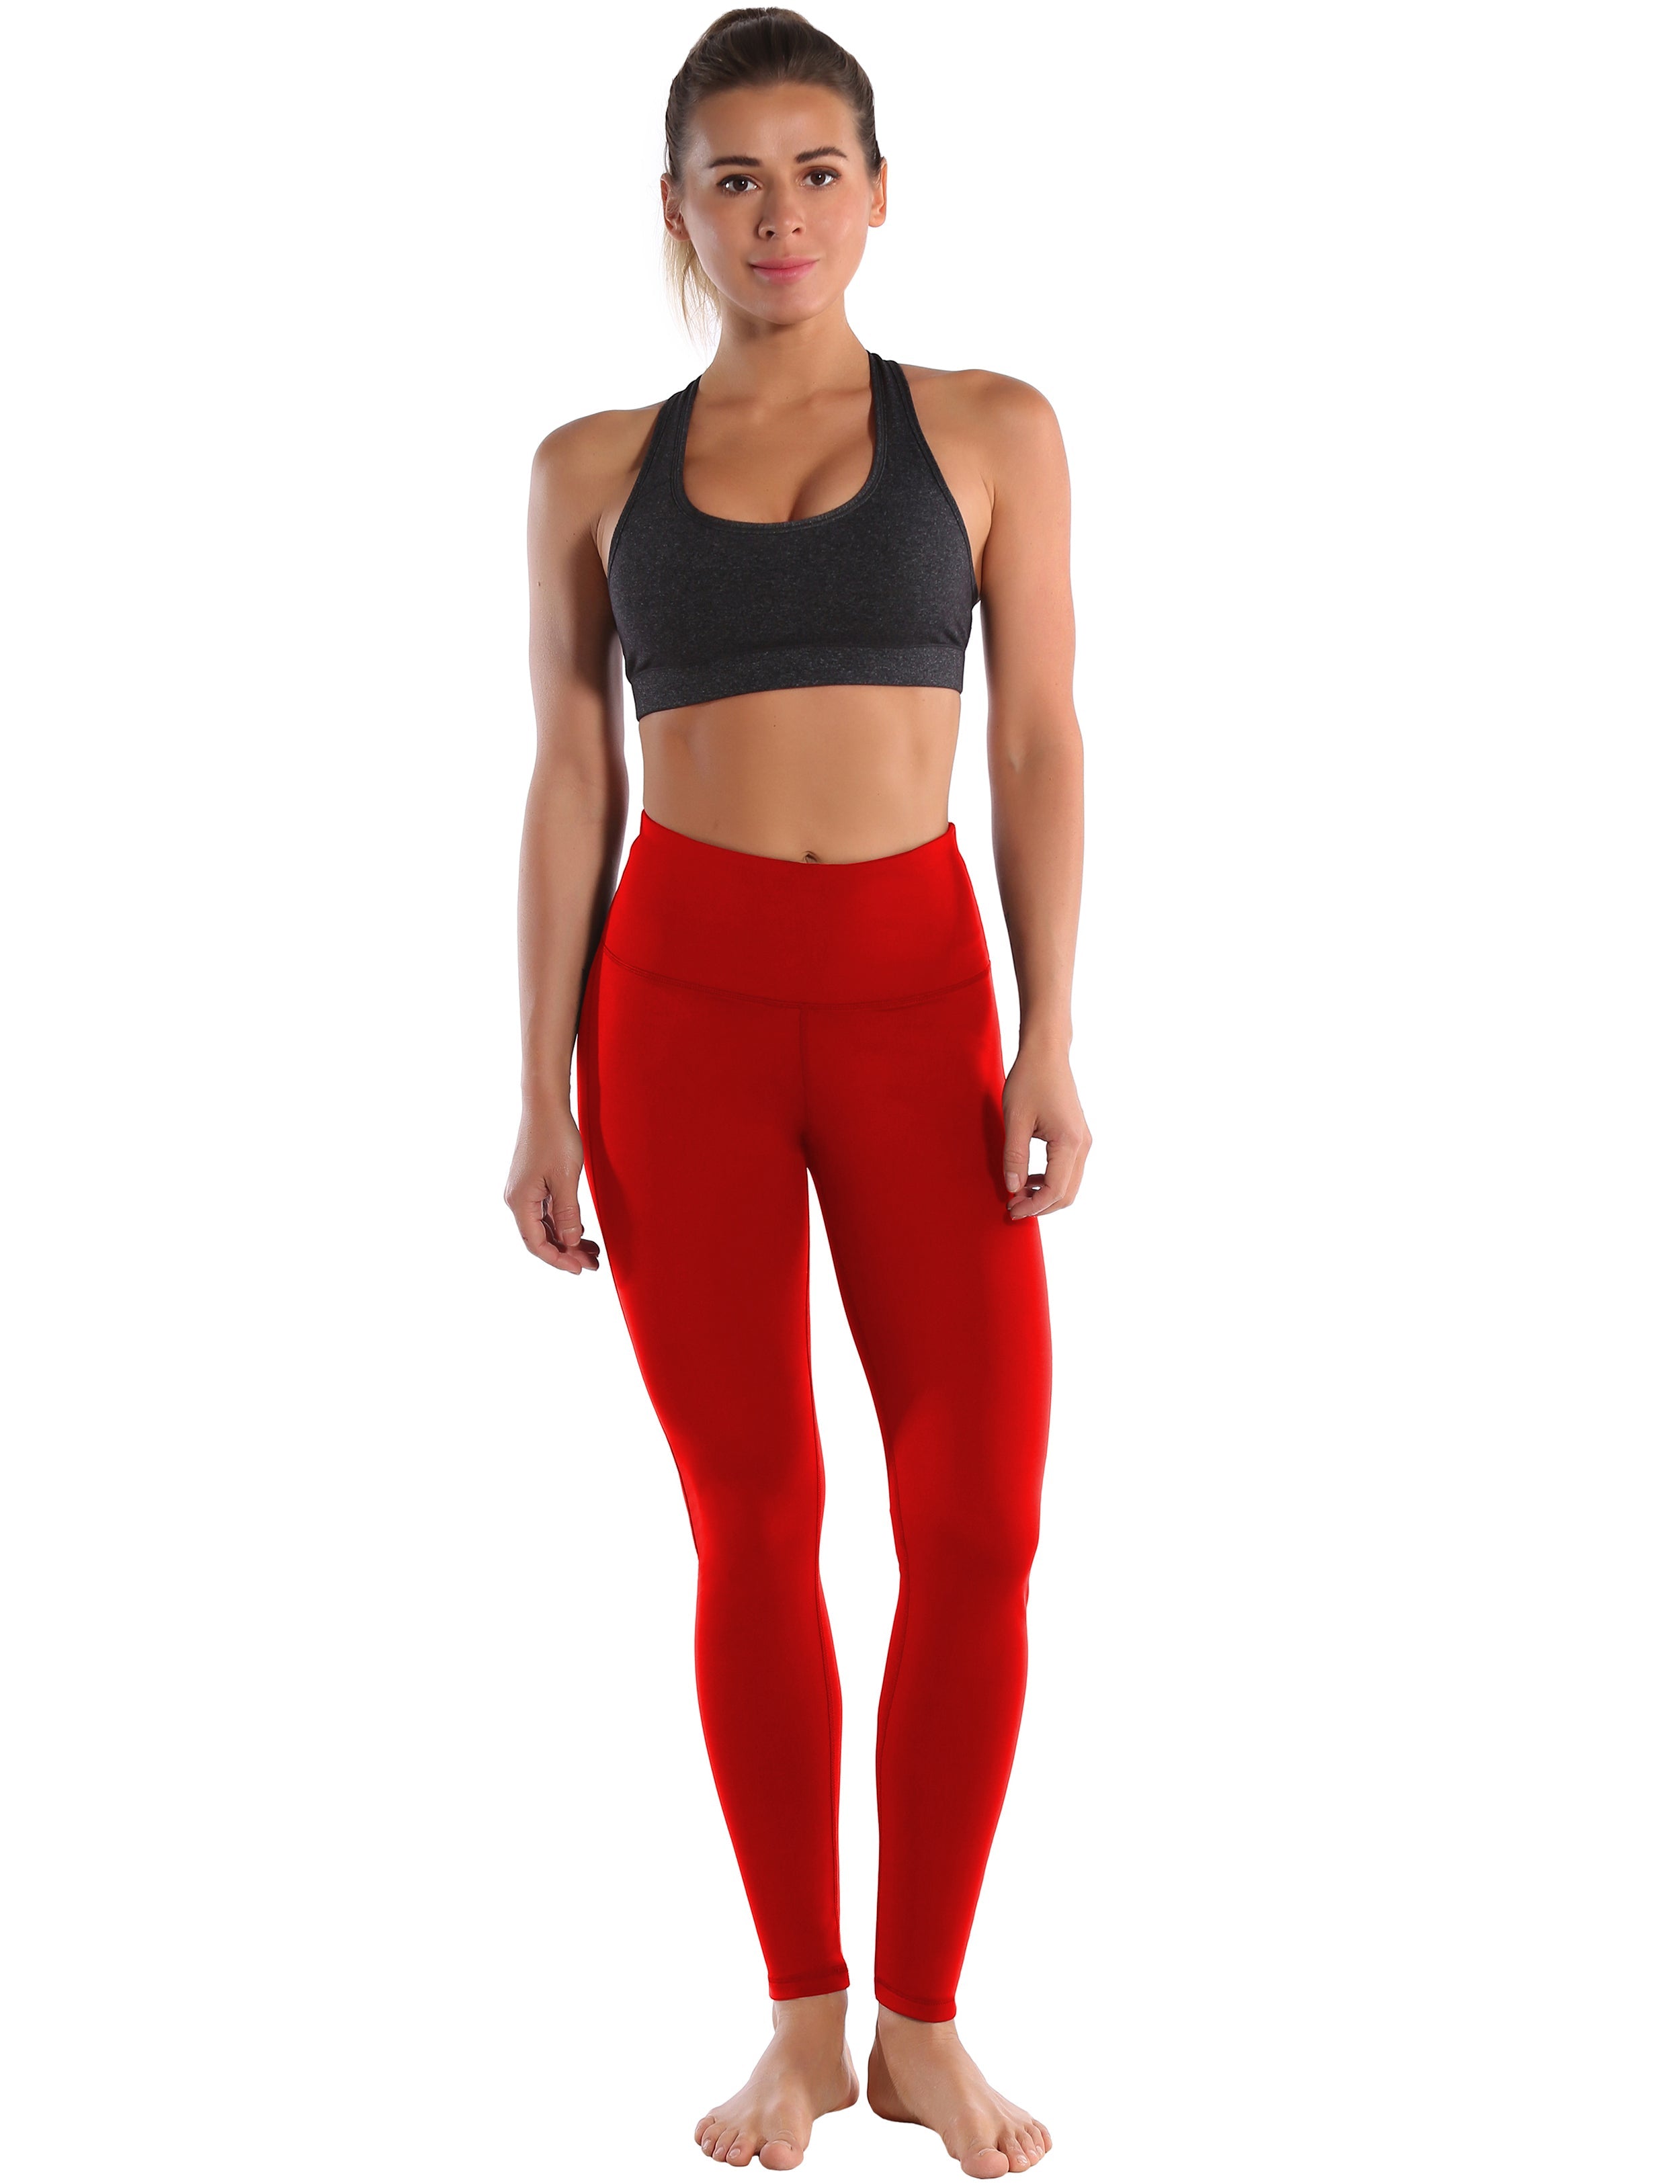 High Waist Side Line Jogging Pants scarlet Side Line is Make Your Legs Look Longer and Thinner 75%Nylon/25%Spandex Fabric doesn't attract lint easily 4-way stretch No see-through Moisture-wicking Tummy control Inner pocket Two lengths